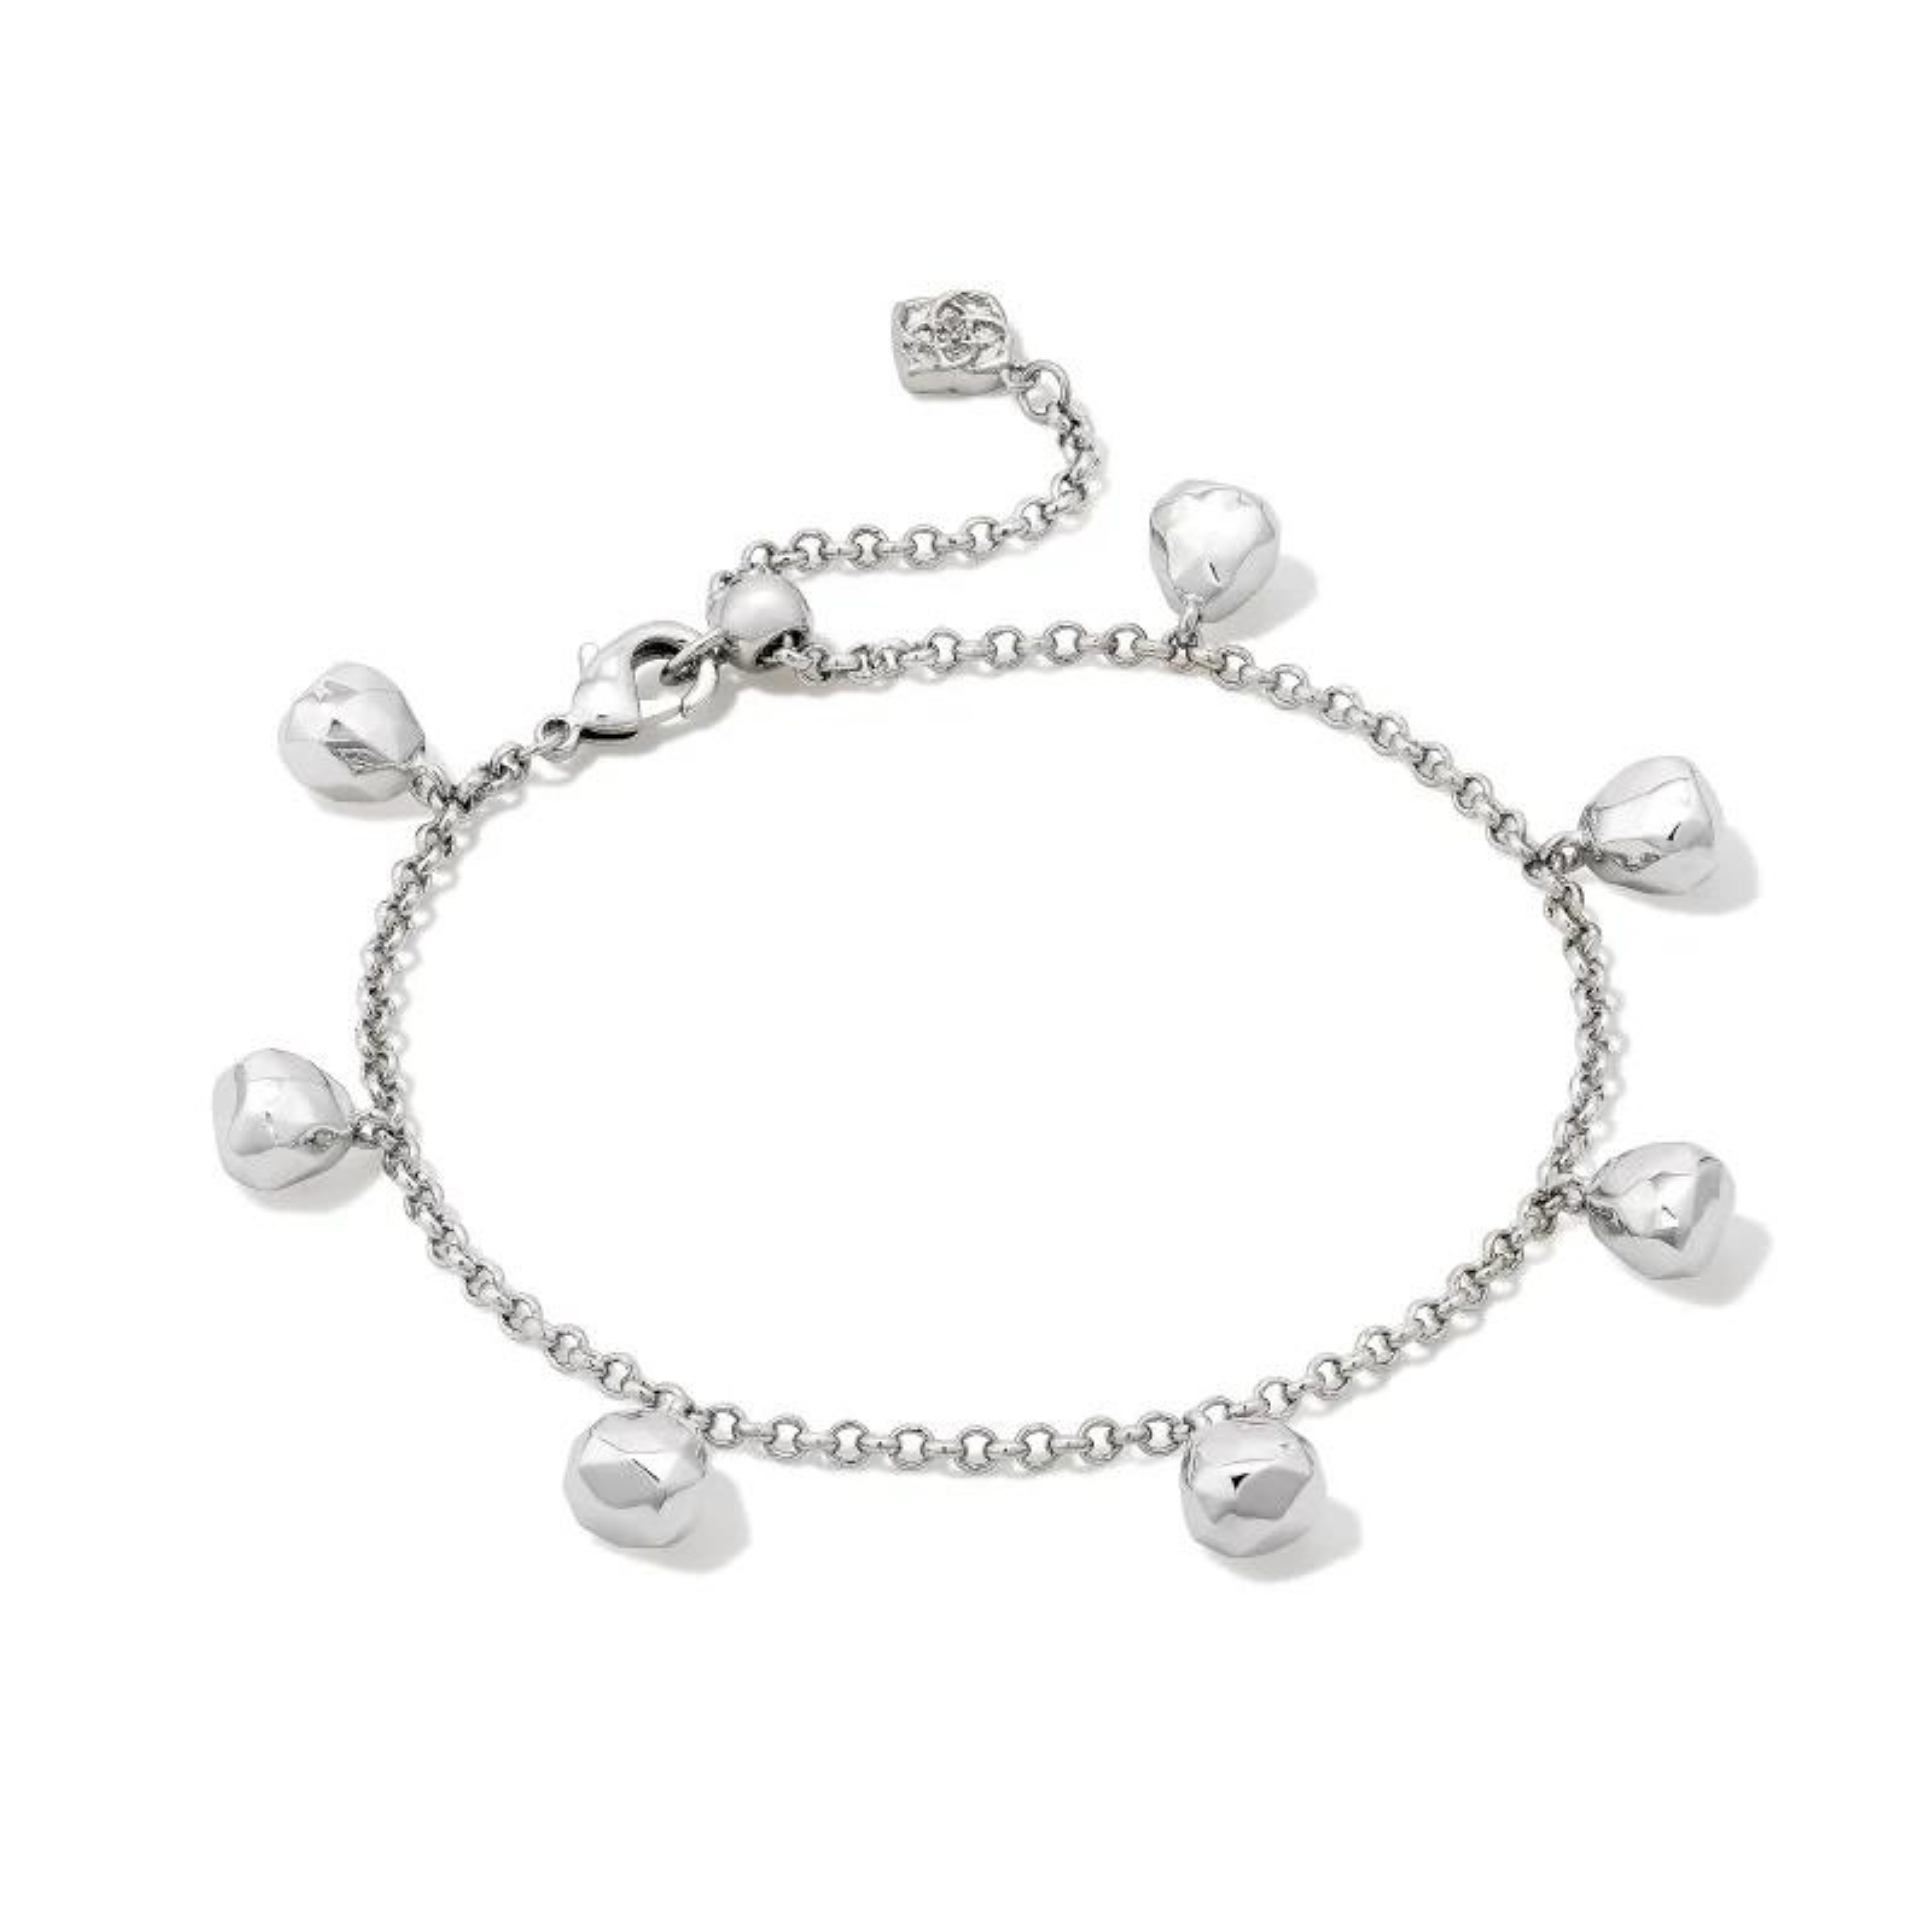 Silver chain bracelet with silver bead charms hanging off of the bracelet. This necklace is pictured on a white background. 